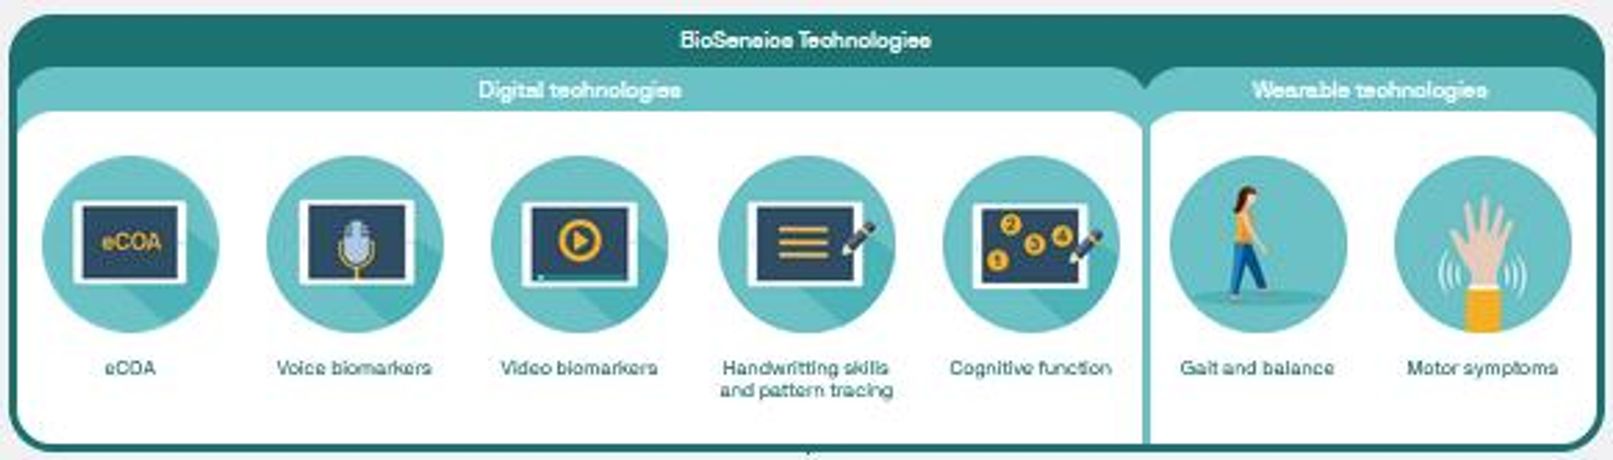 BioSensics - Version BioDigit Clinic - Integrated Software for Centralized and Objective Assessment